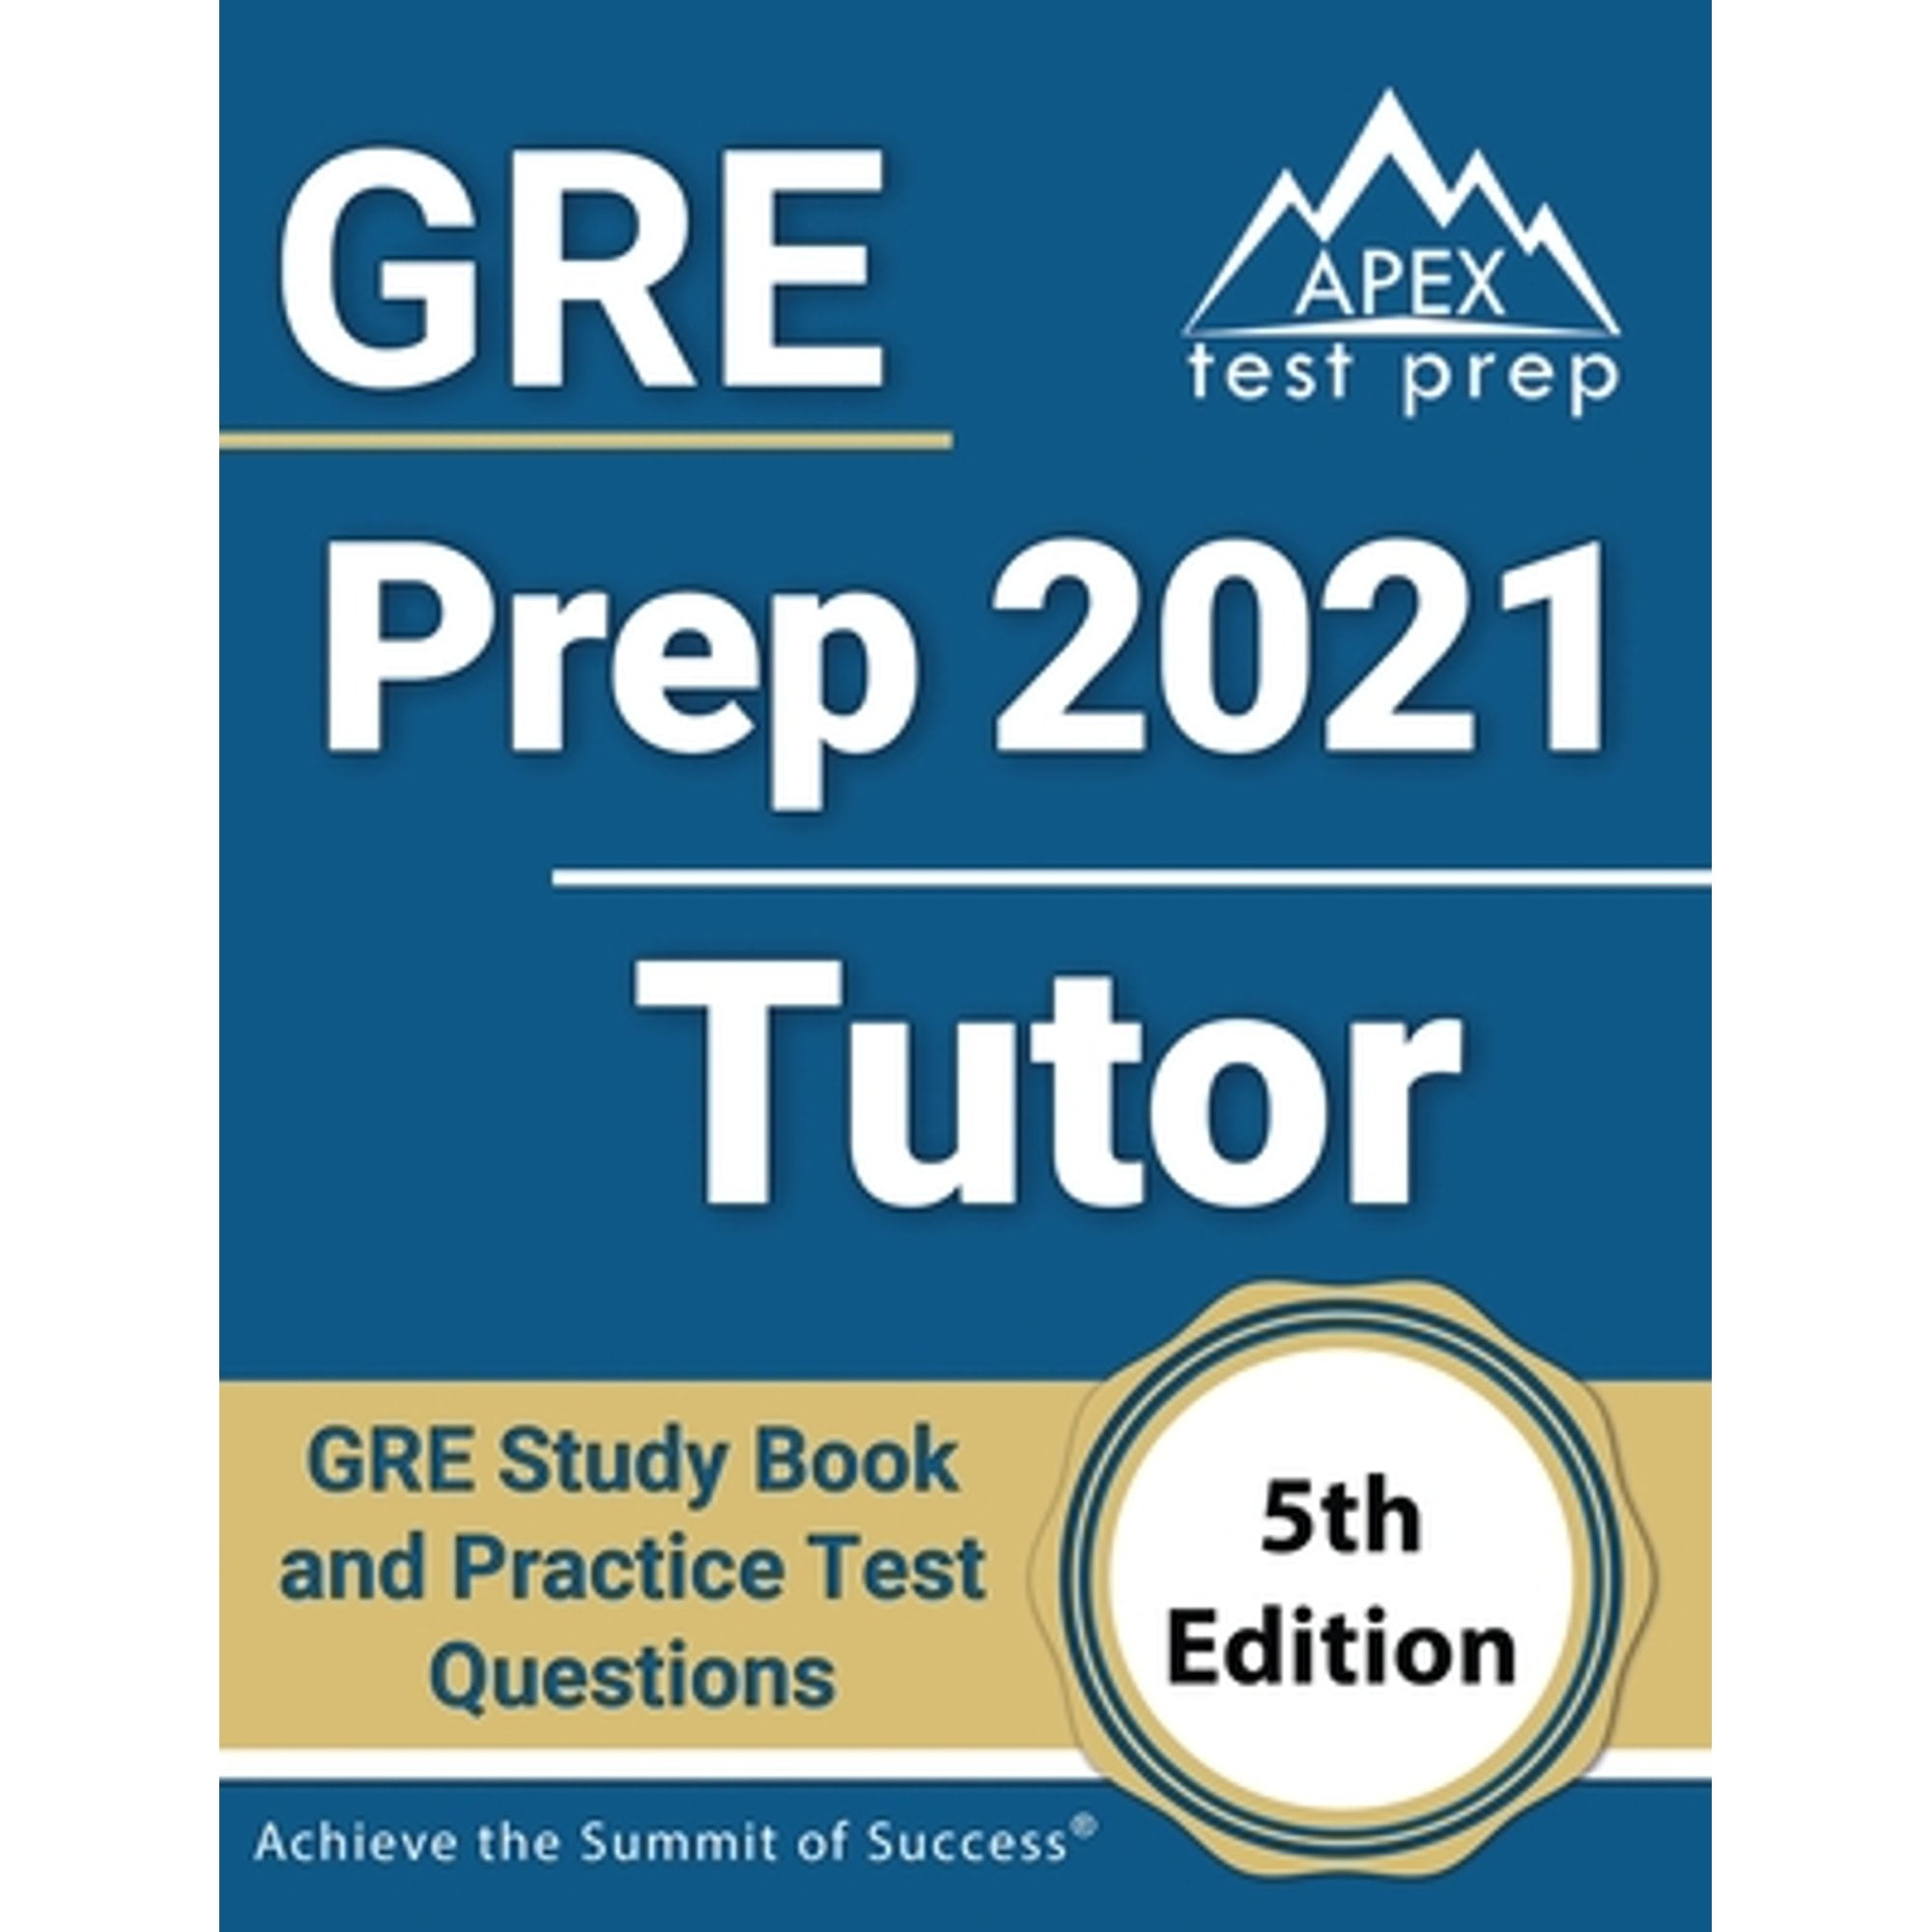 Pre-Owned GRE Prep 2021 Tutor: GRE Study Book and Practice Test Questions [5th Edition] (Paperback 9781628457087) by Apex Publishing